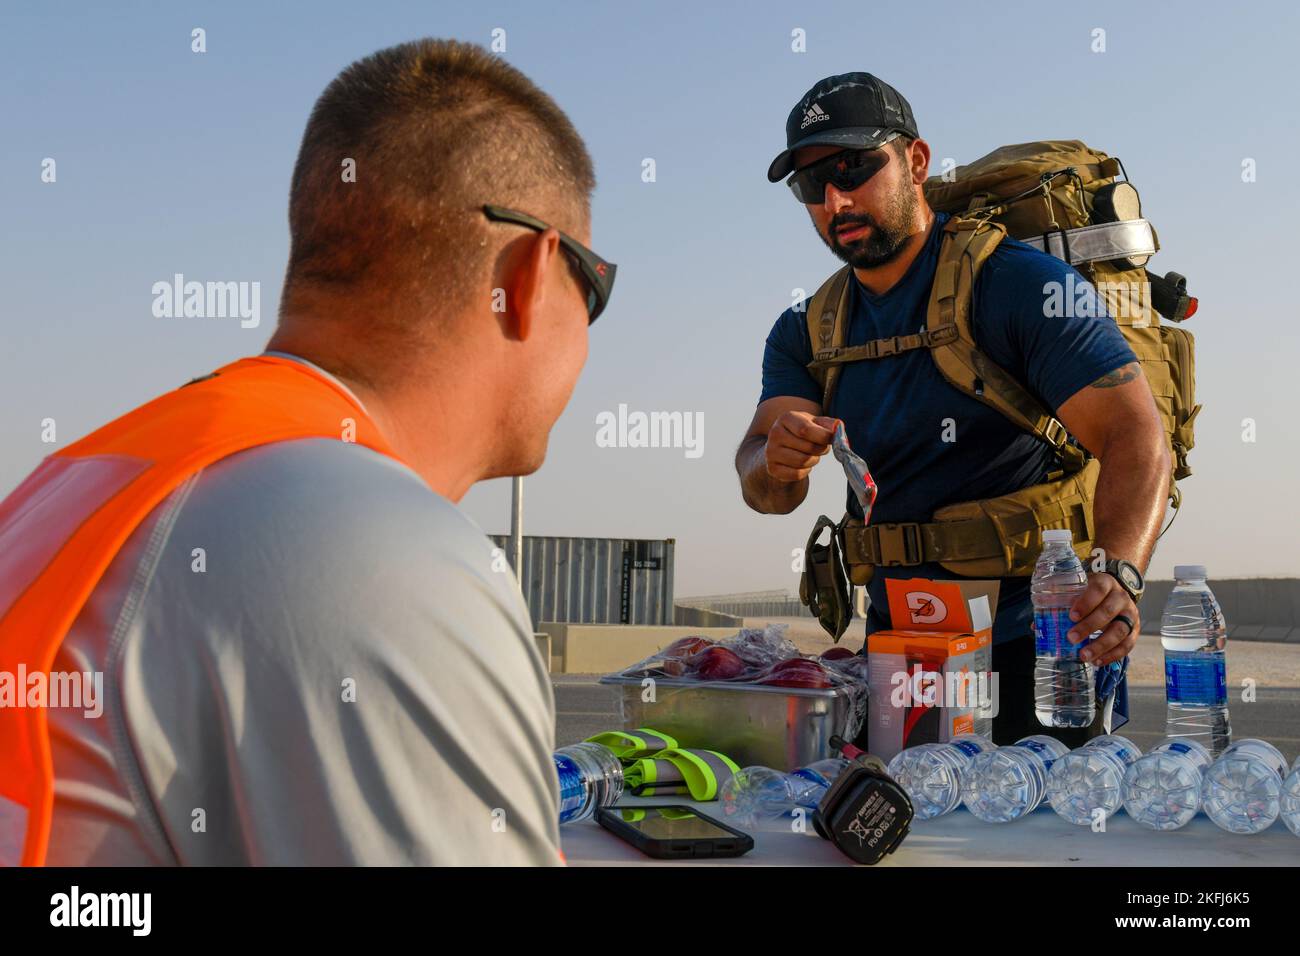 A U.S. service member deployed to Prince Sultan Air Base, Kingdom of Saudi Arabia, stops for water during a half marathon in celebration of the U.S. Air Force’s 75th Anniversary, Sept.18, 2022. The USAF official separated from the U.S. Army with the signing of the National Security Act of 1947 by former U.S. President Harry Truman. Fly, Fight and Win - Airpower Anytime, Anywhere! Stock Photo